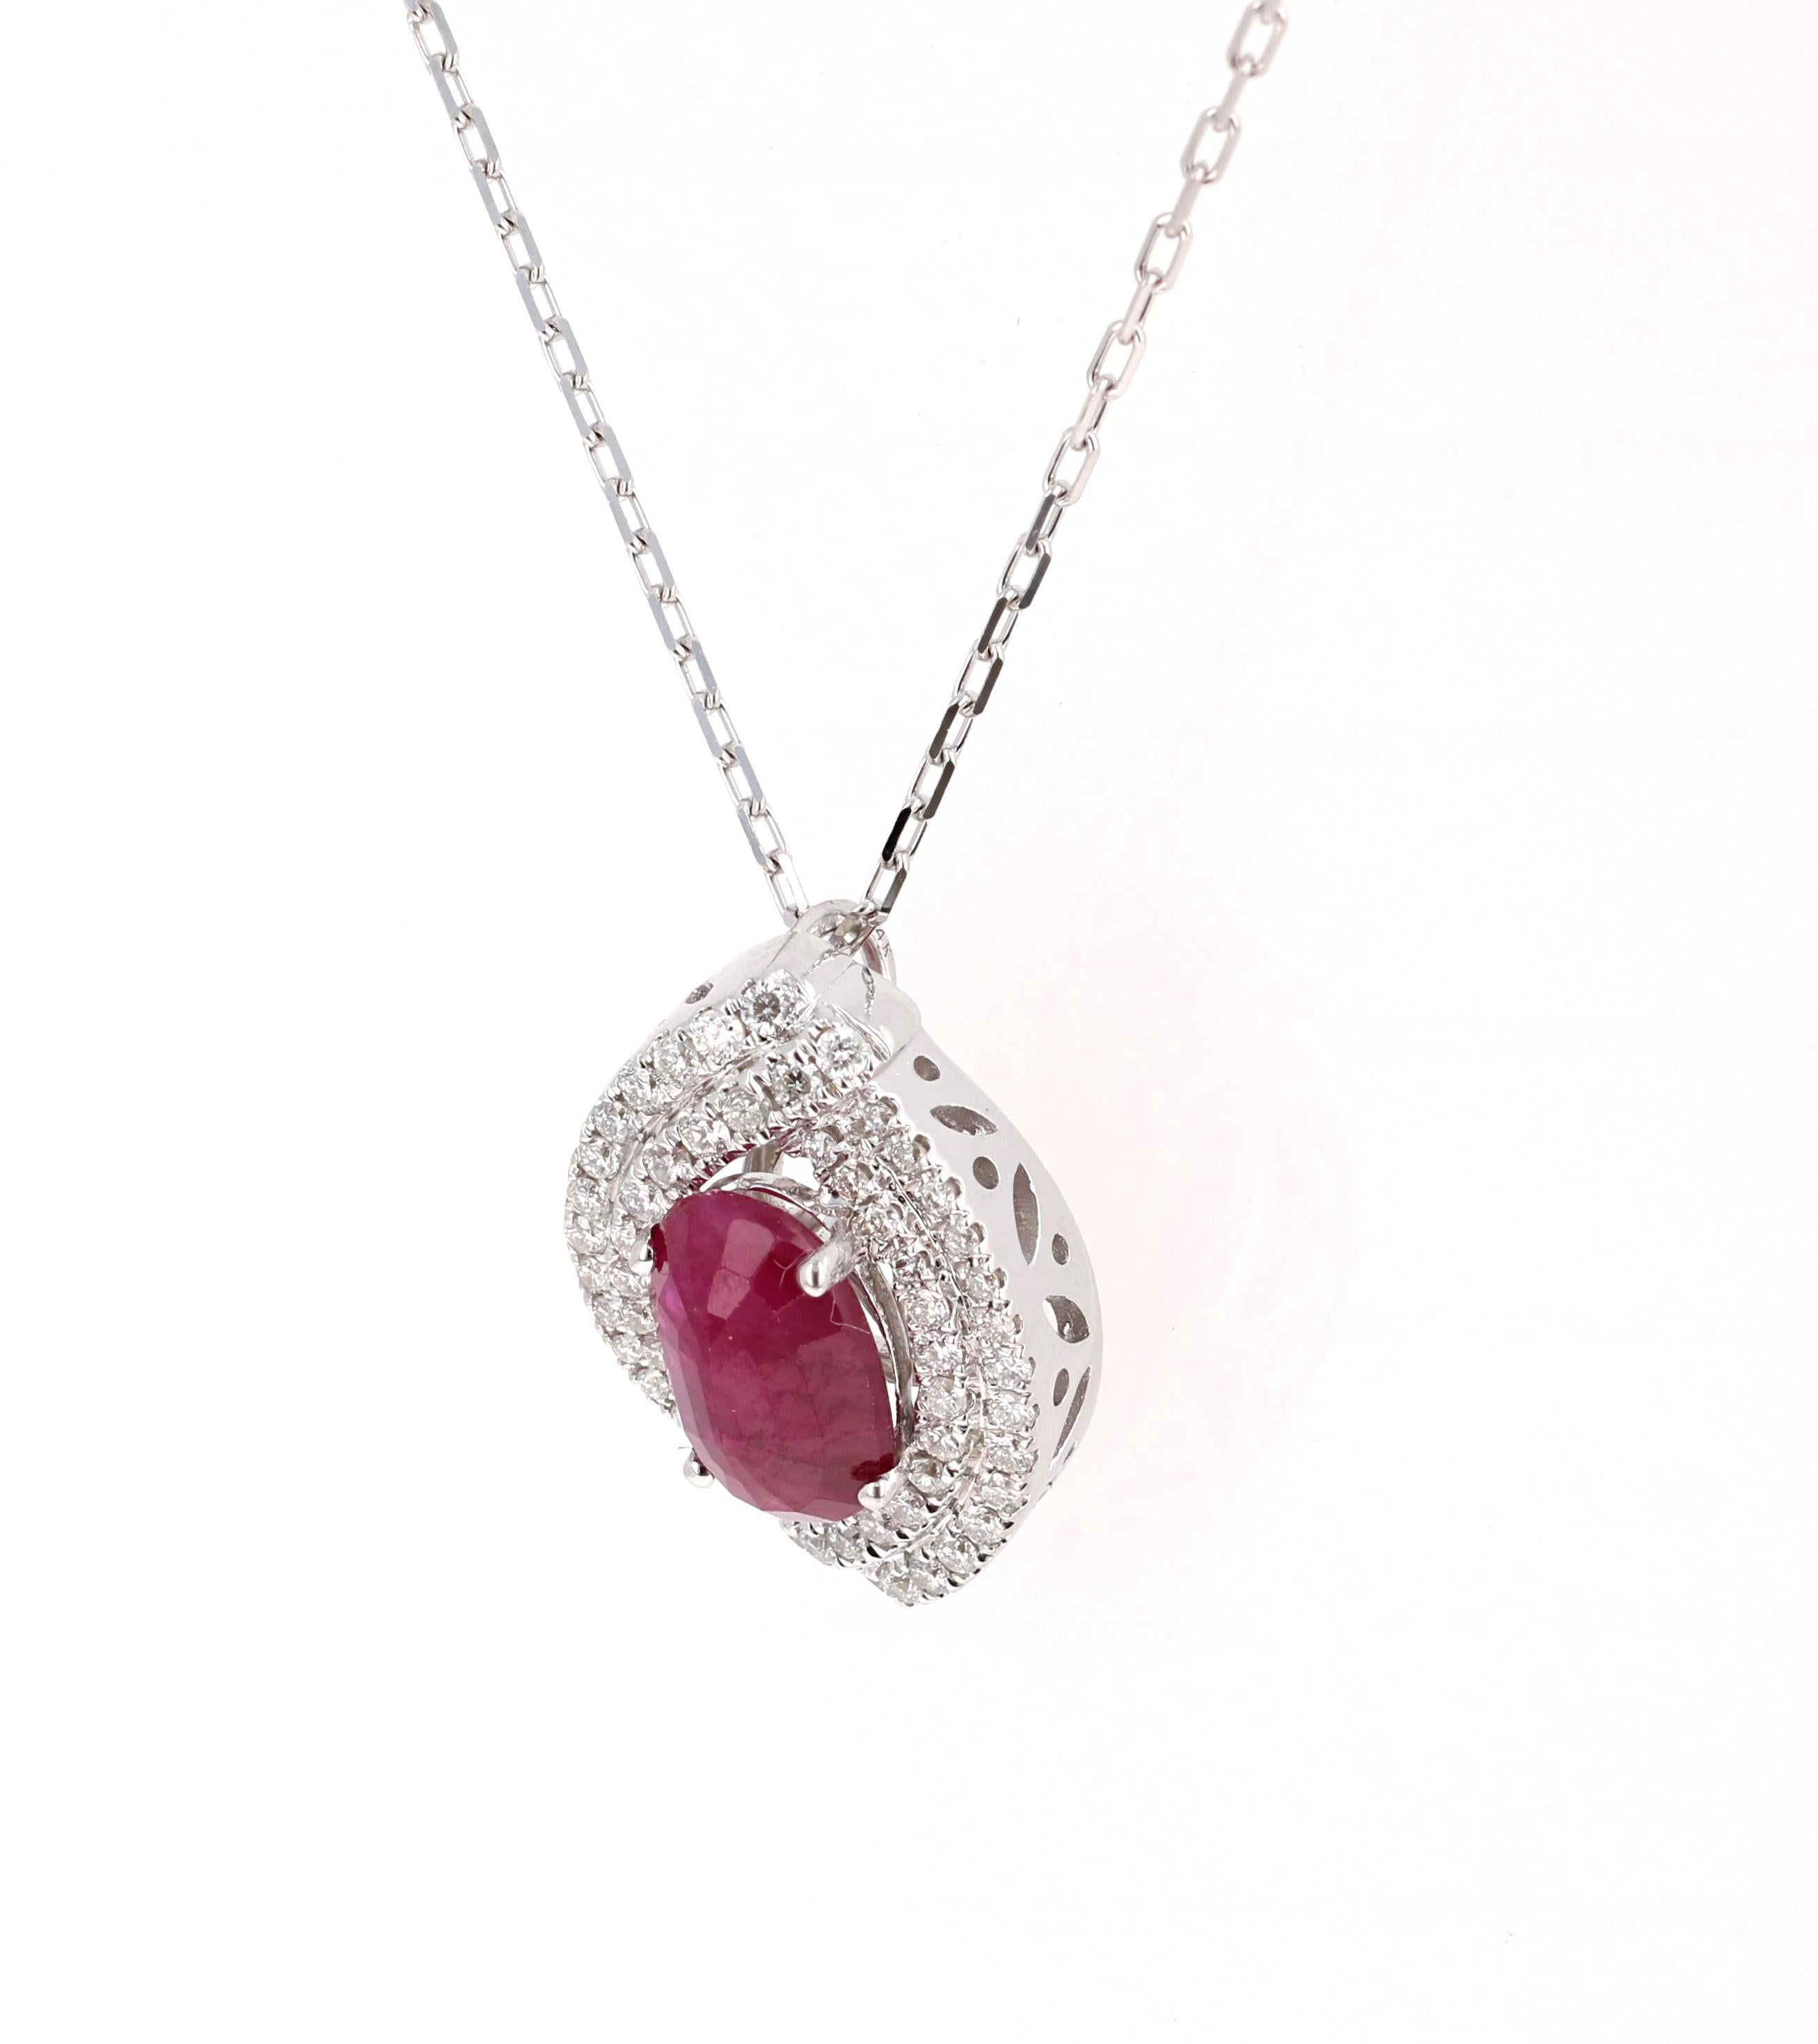 Ruby and Diamond Chain Necklace

This one of a kind beauty has a magnificent 2.04 Carat Marquise Cut Ruby. 
It is surrounded by 60 Round Cut Diamonds that weigh 0.60 Carats.  
The total carat weight of the pendant is 2.64 Carats and measures at 0.75